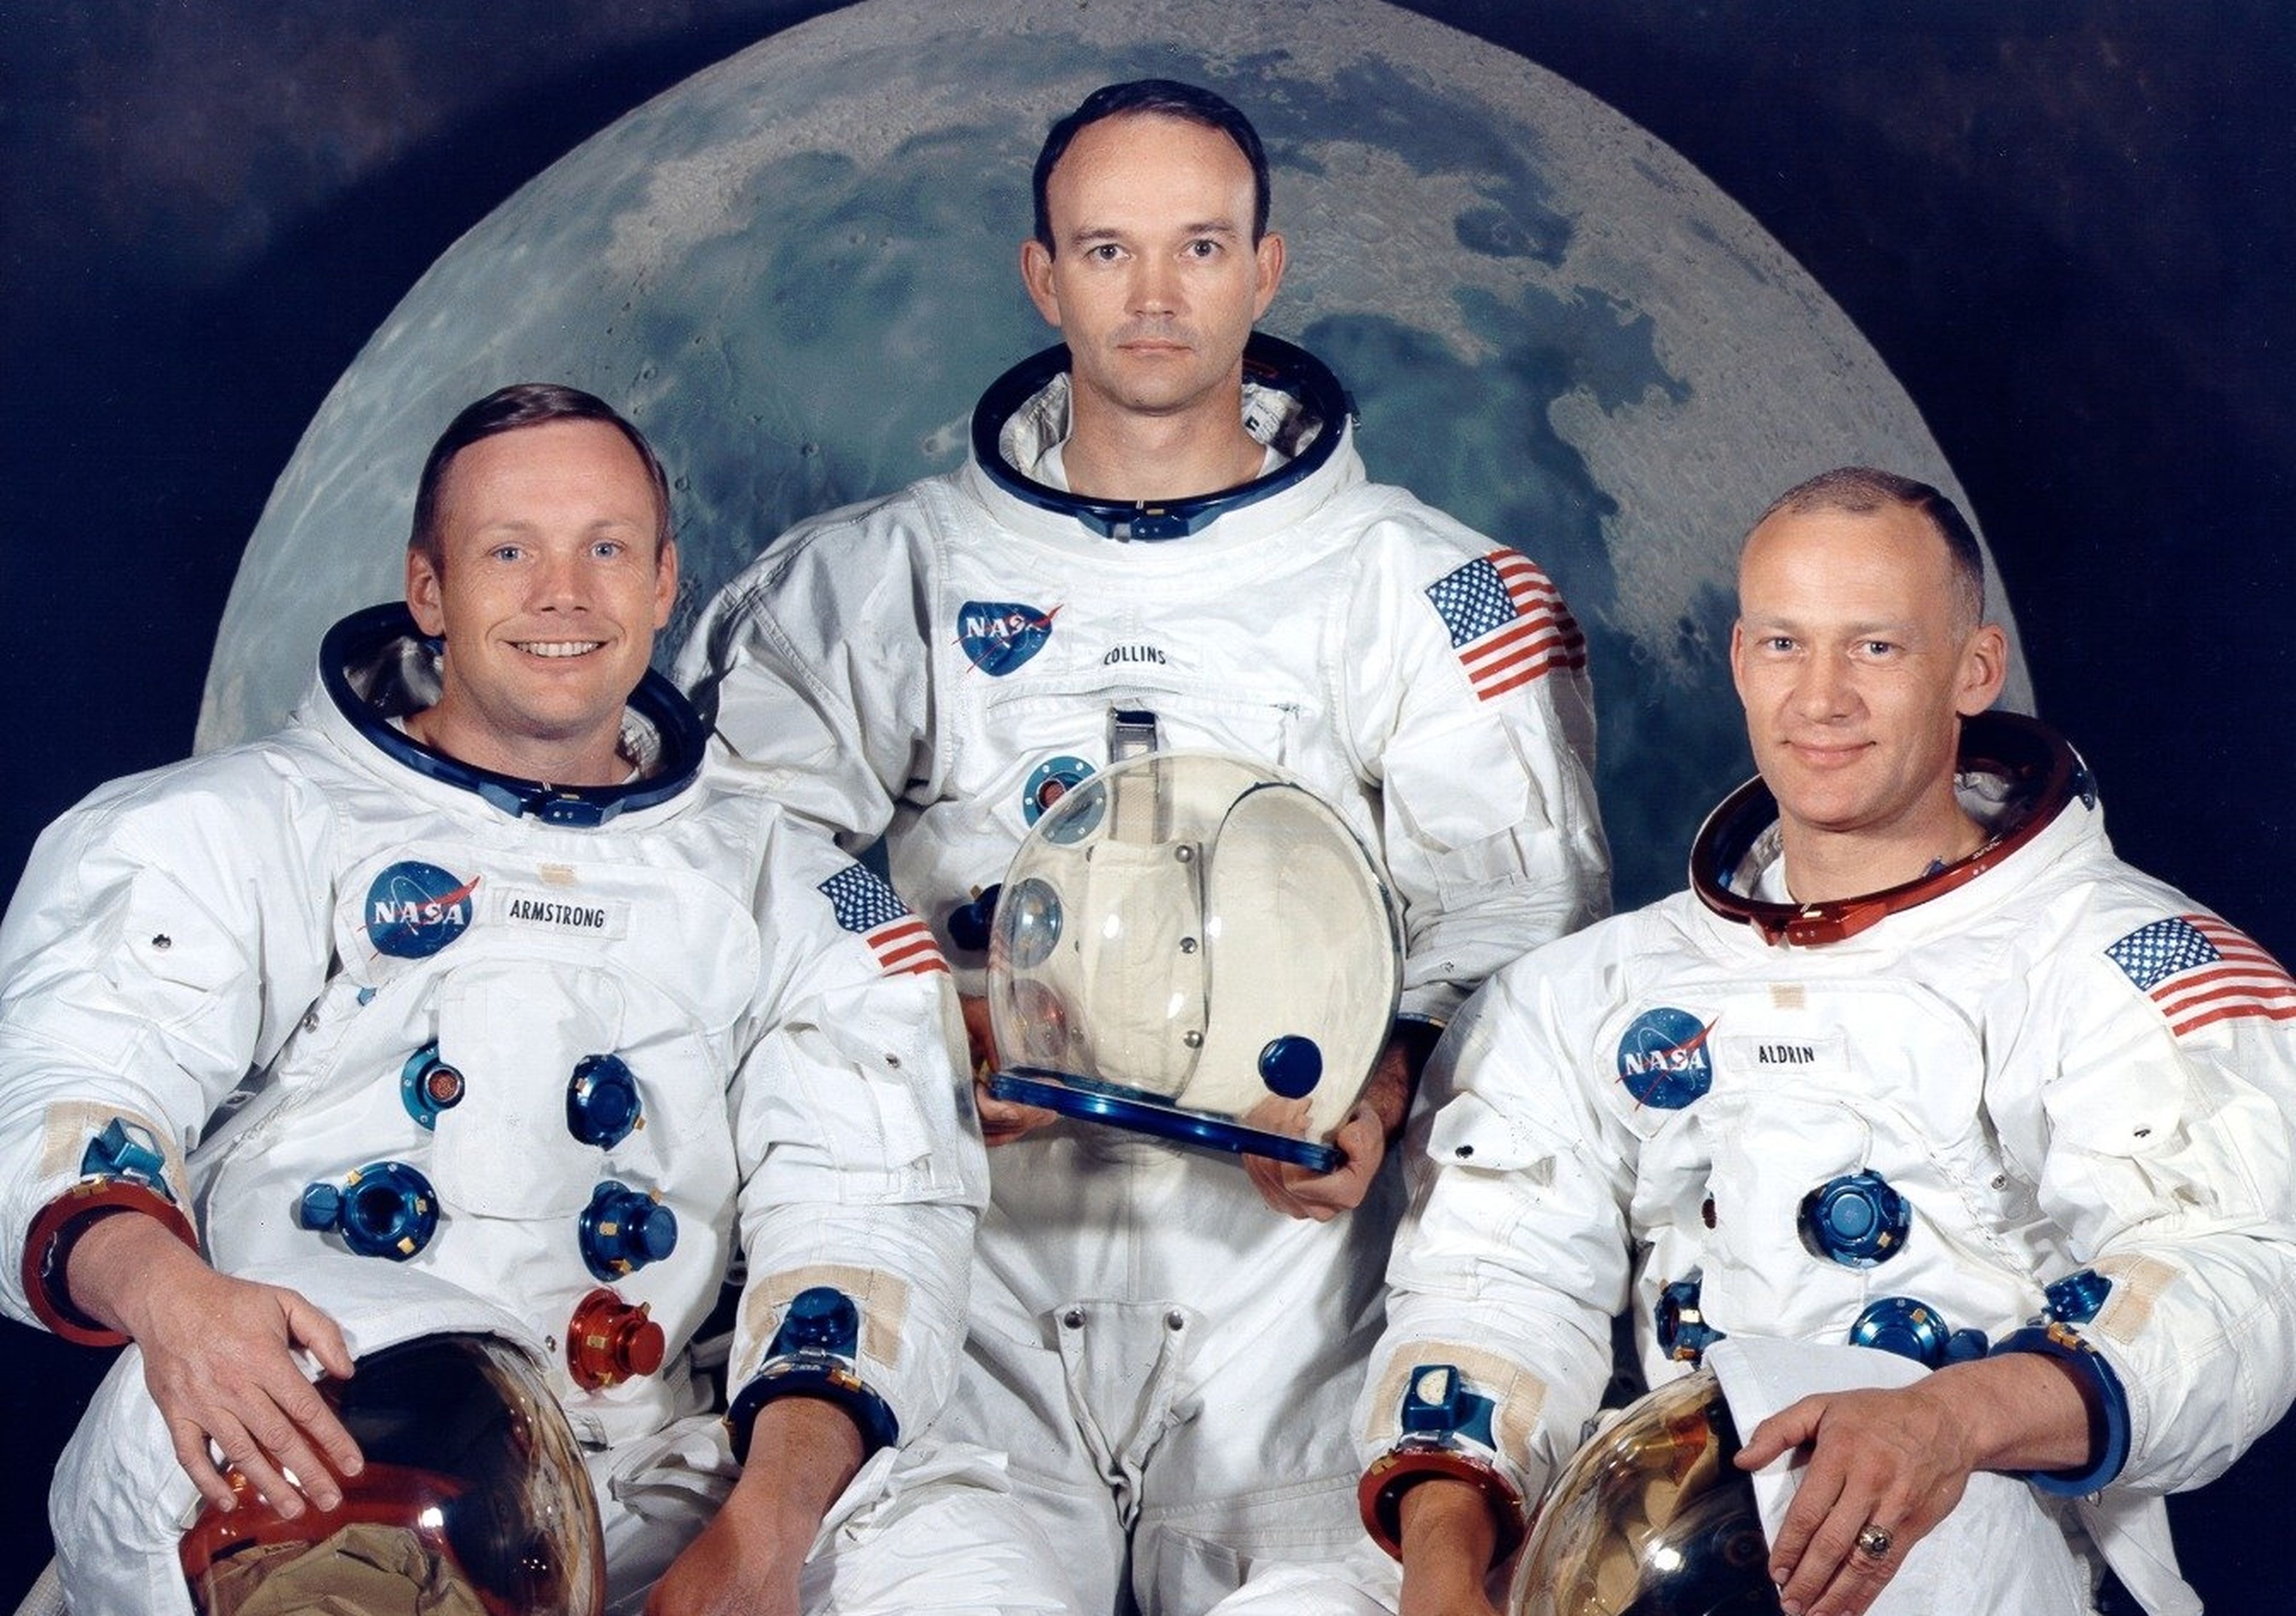 Neil Armstrong (left) and Buzz Aldrin (right)